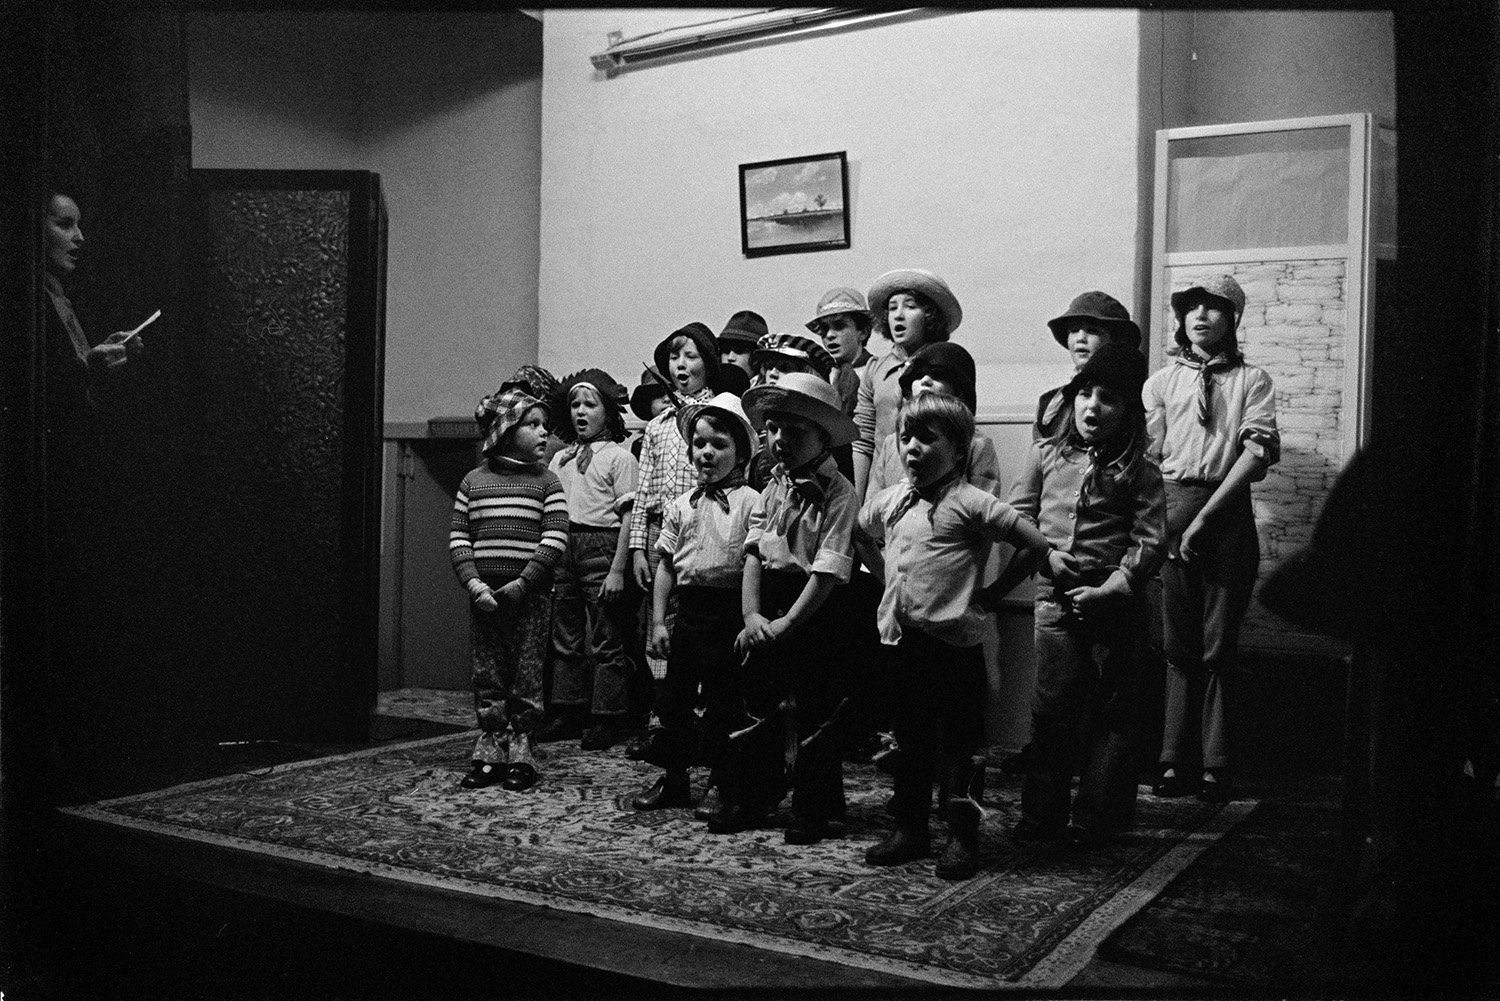 Christmas Show in village hall children's choir.
[A choir of 15 children wearing neck scarves and sun hats being led by a woman, singing in the Christmas Show in Merton Village Hall.]